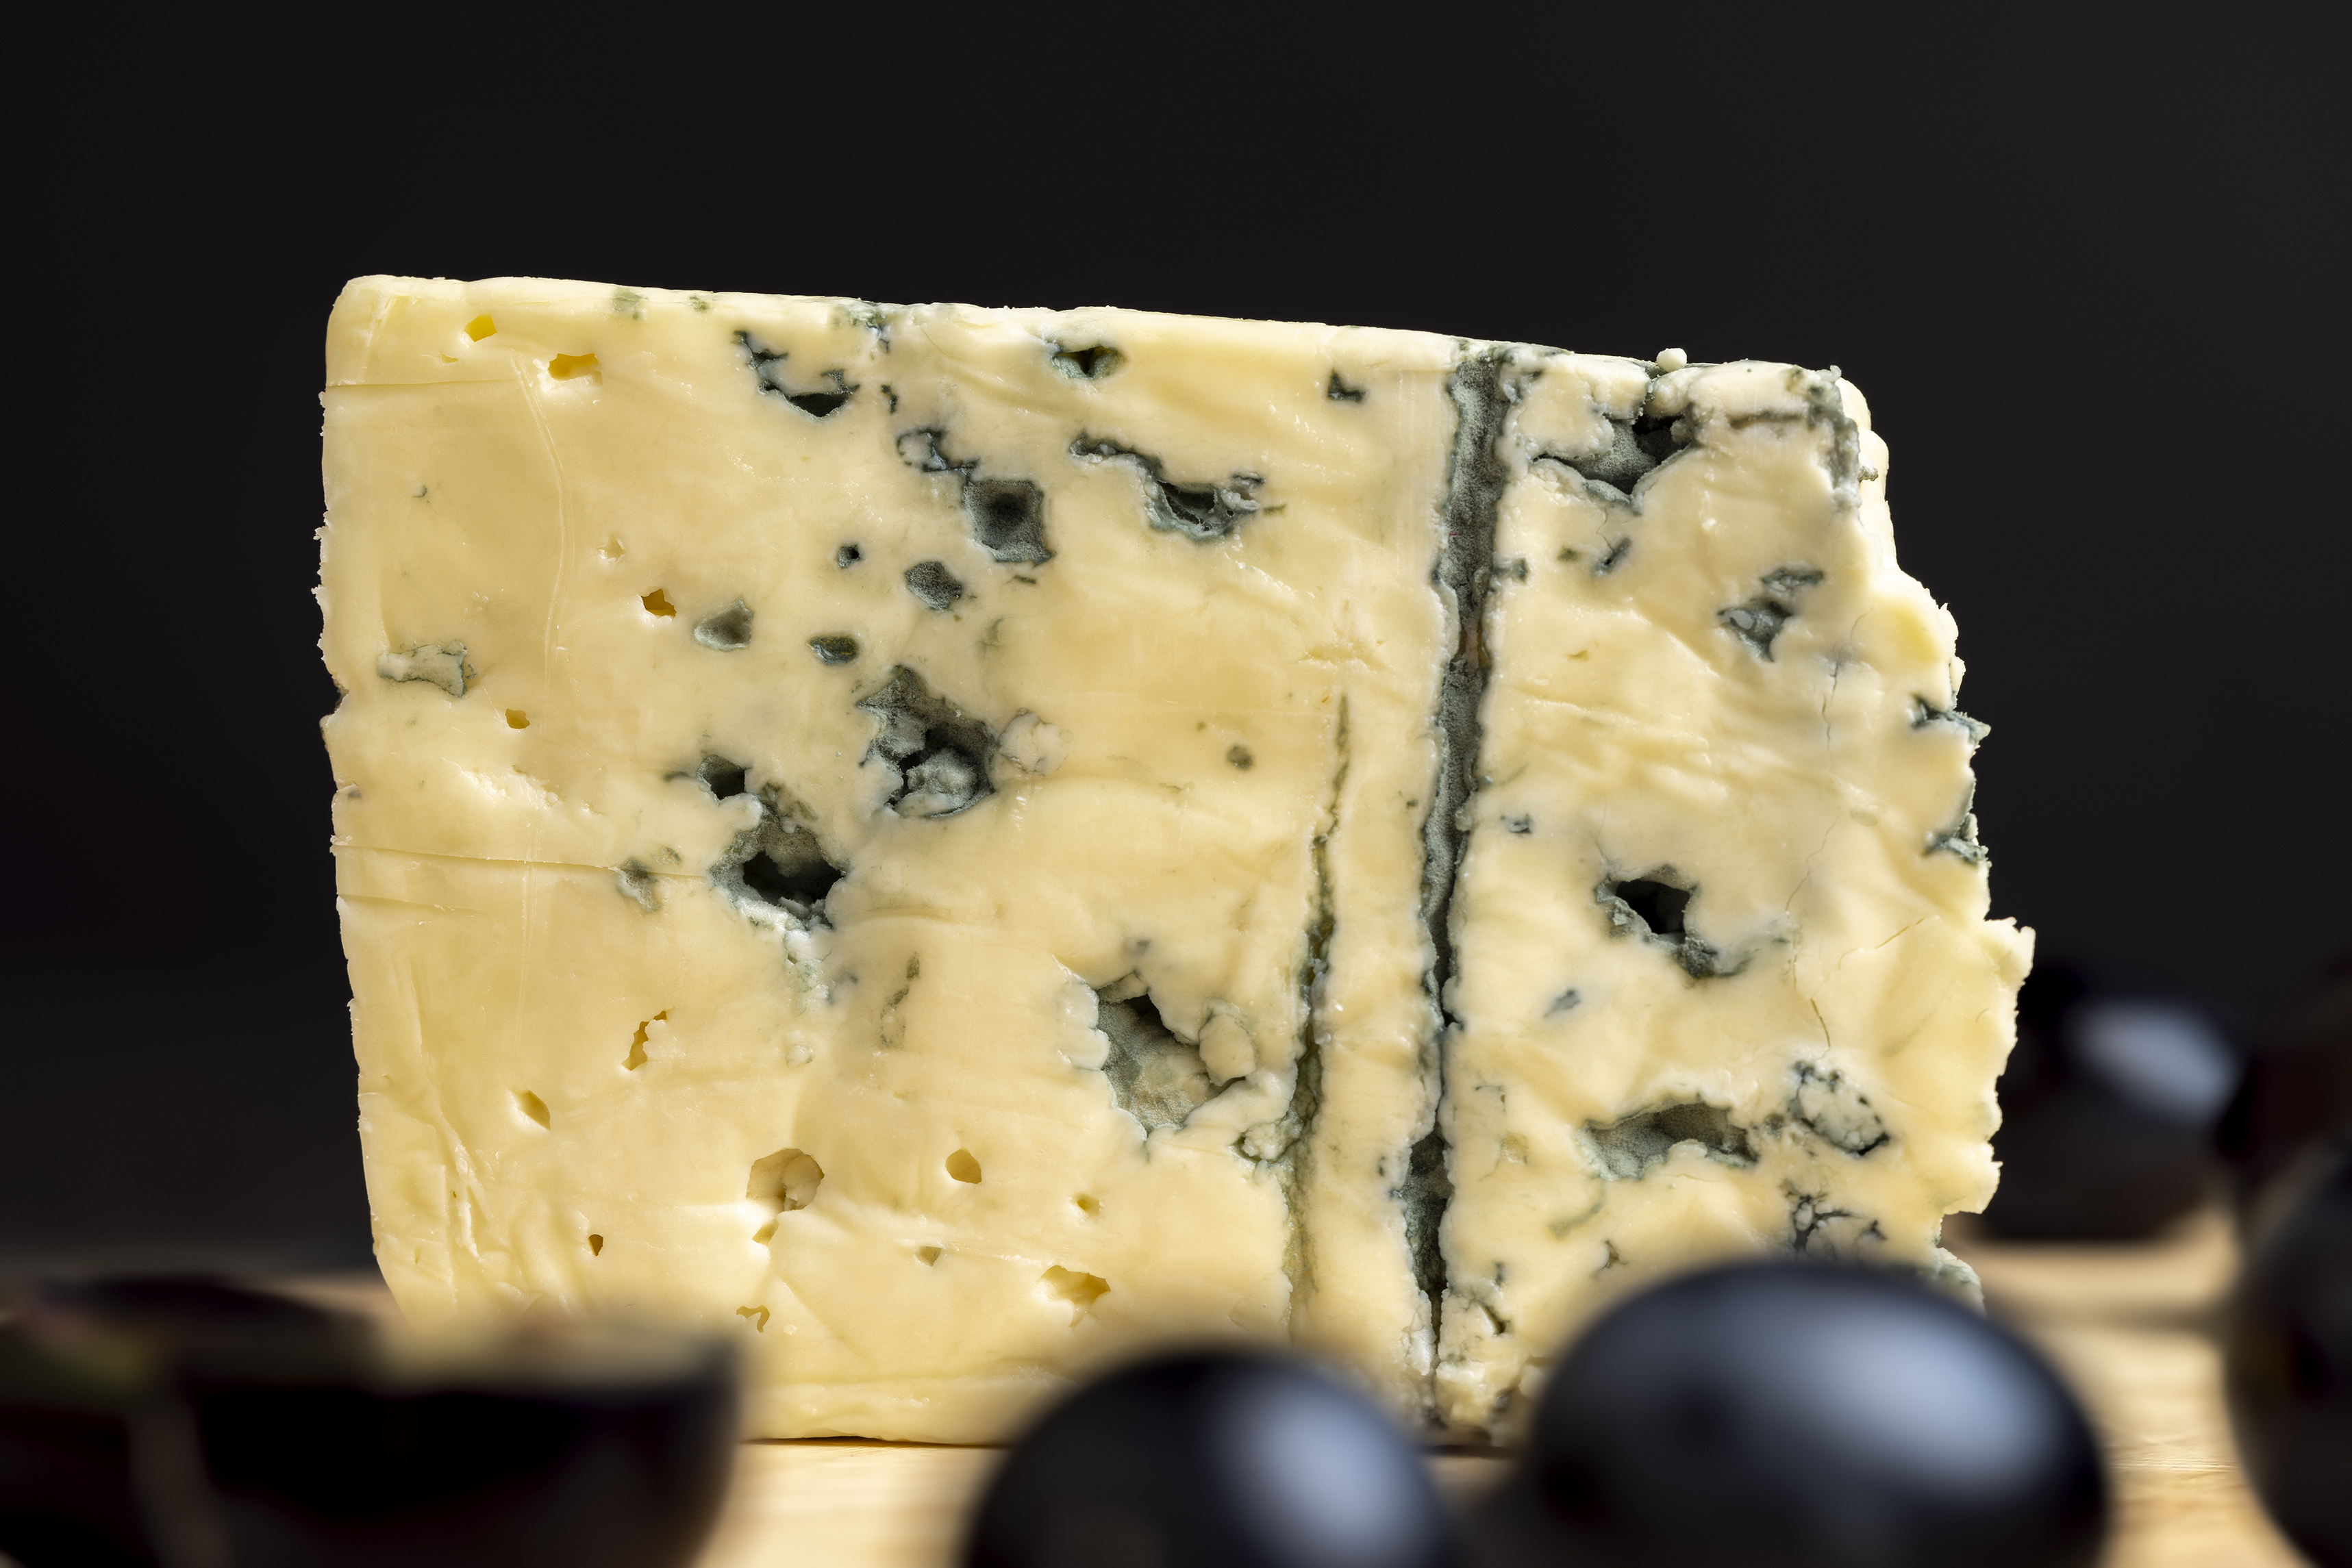 A block of blue cheese